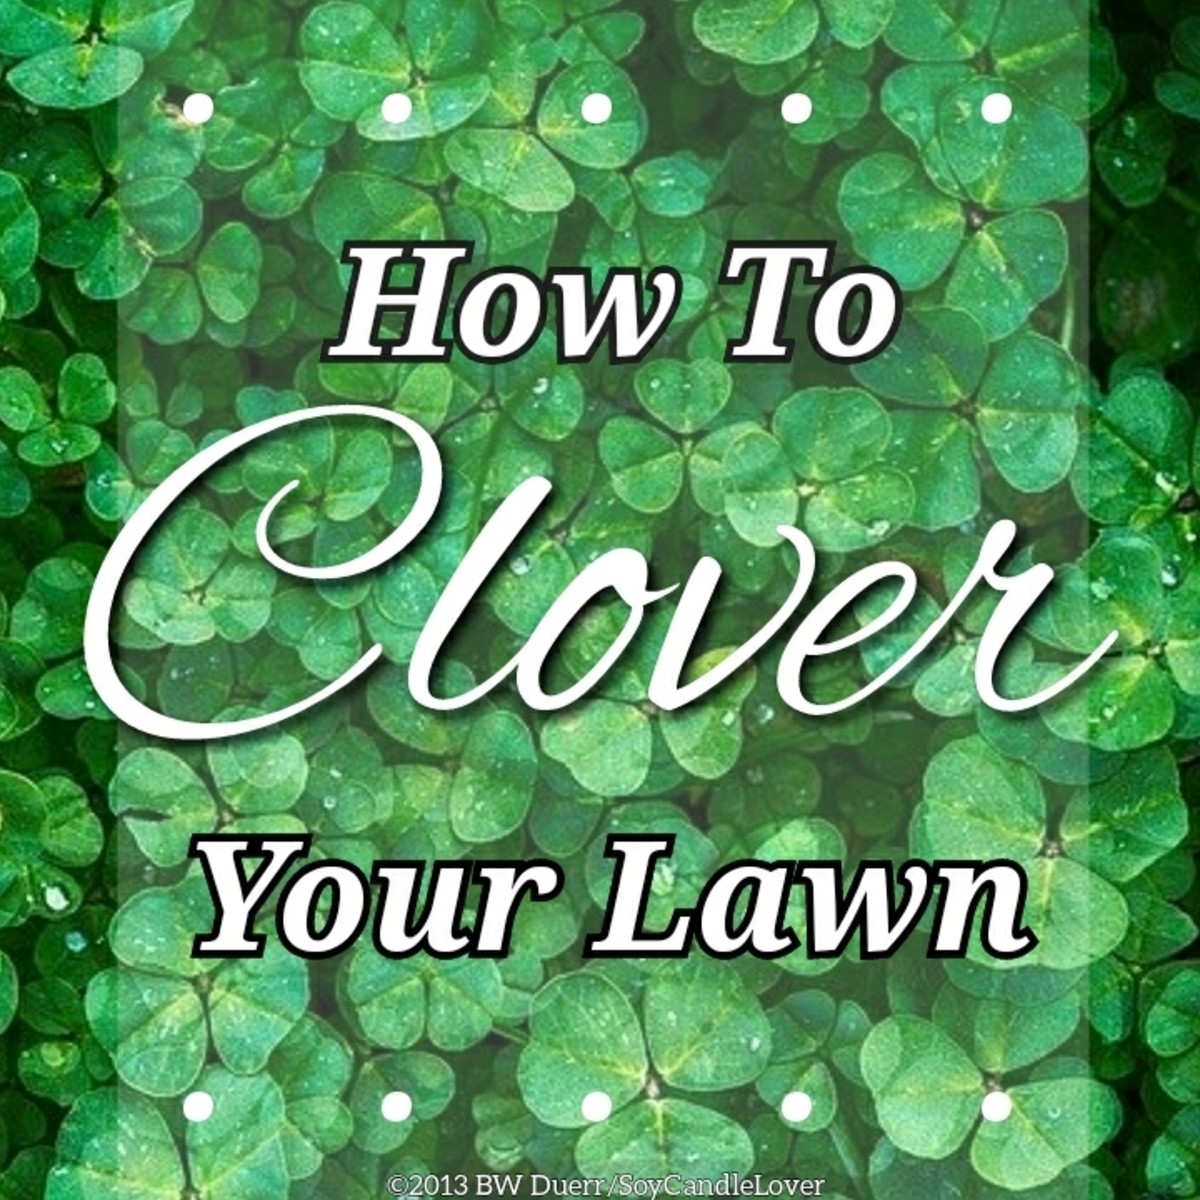 How to clover your lawn.